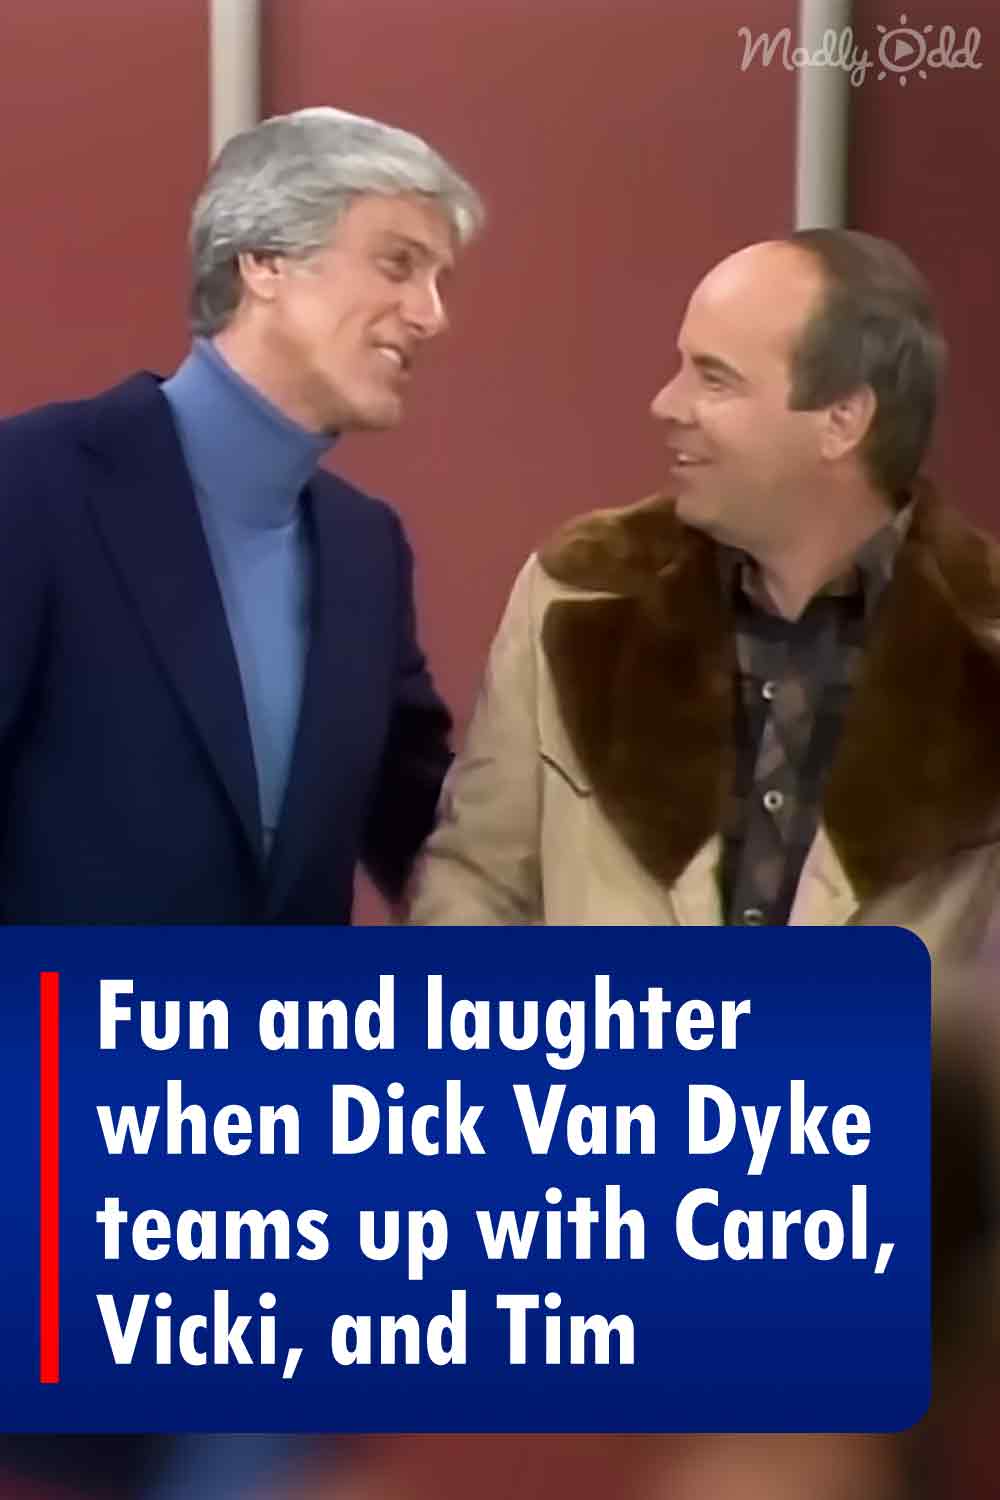 Fun and laughter when Dick Van Dyke teams up with Carol, Vicki, and Tim